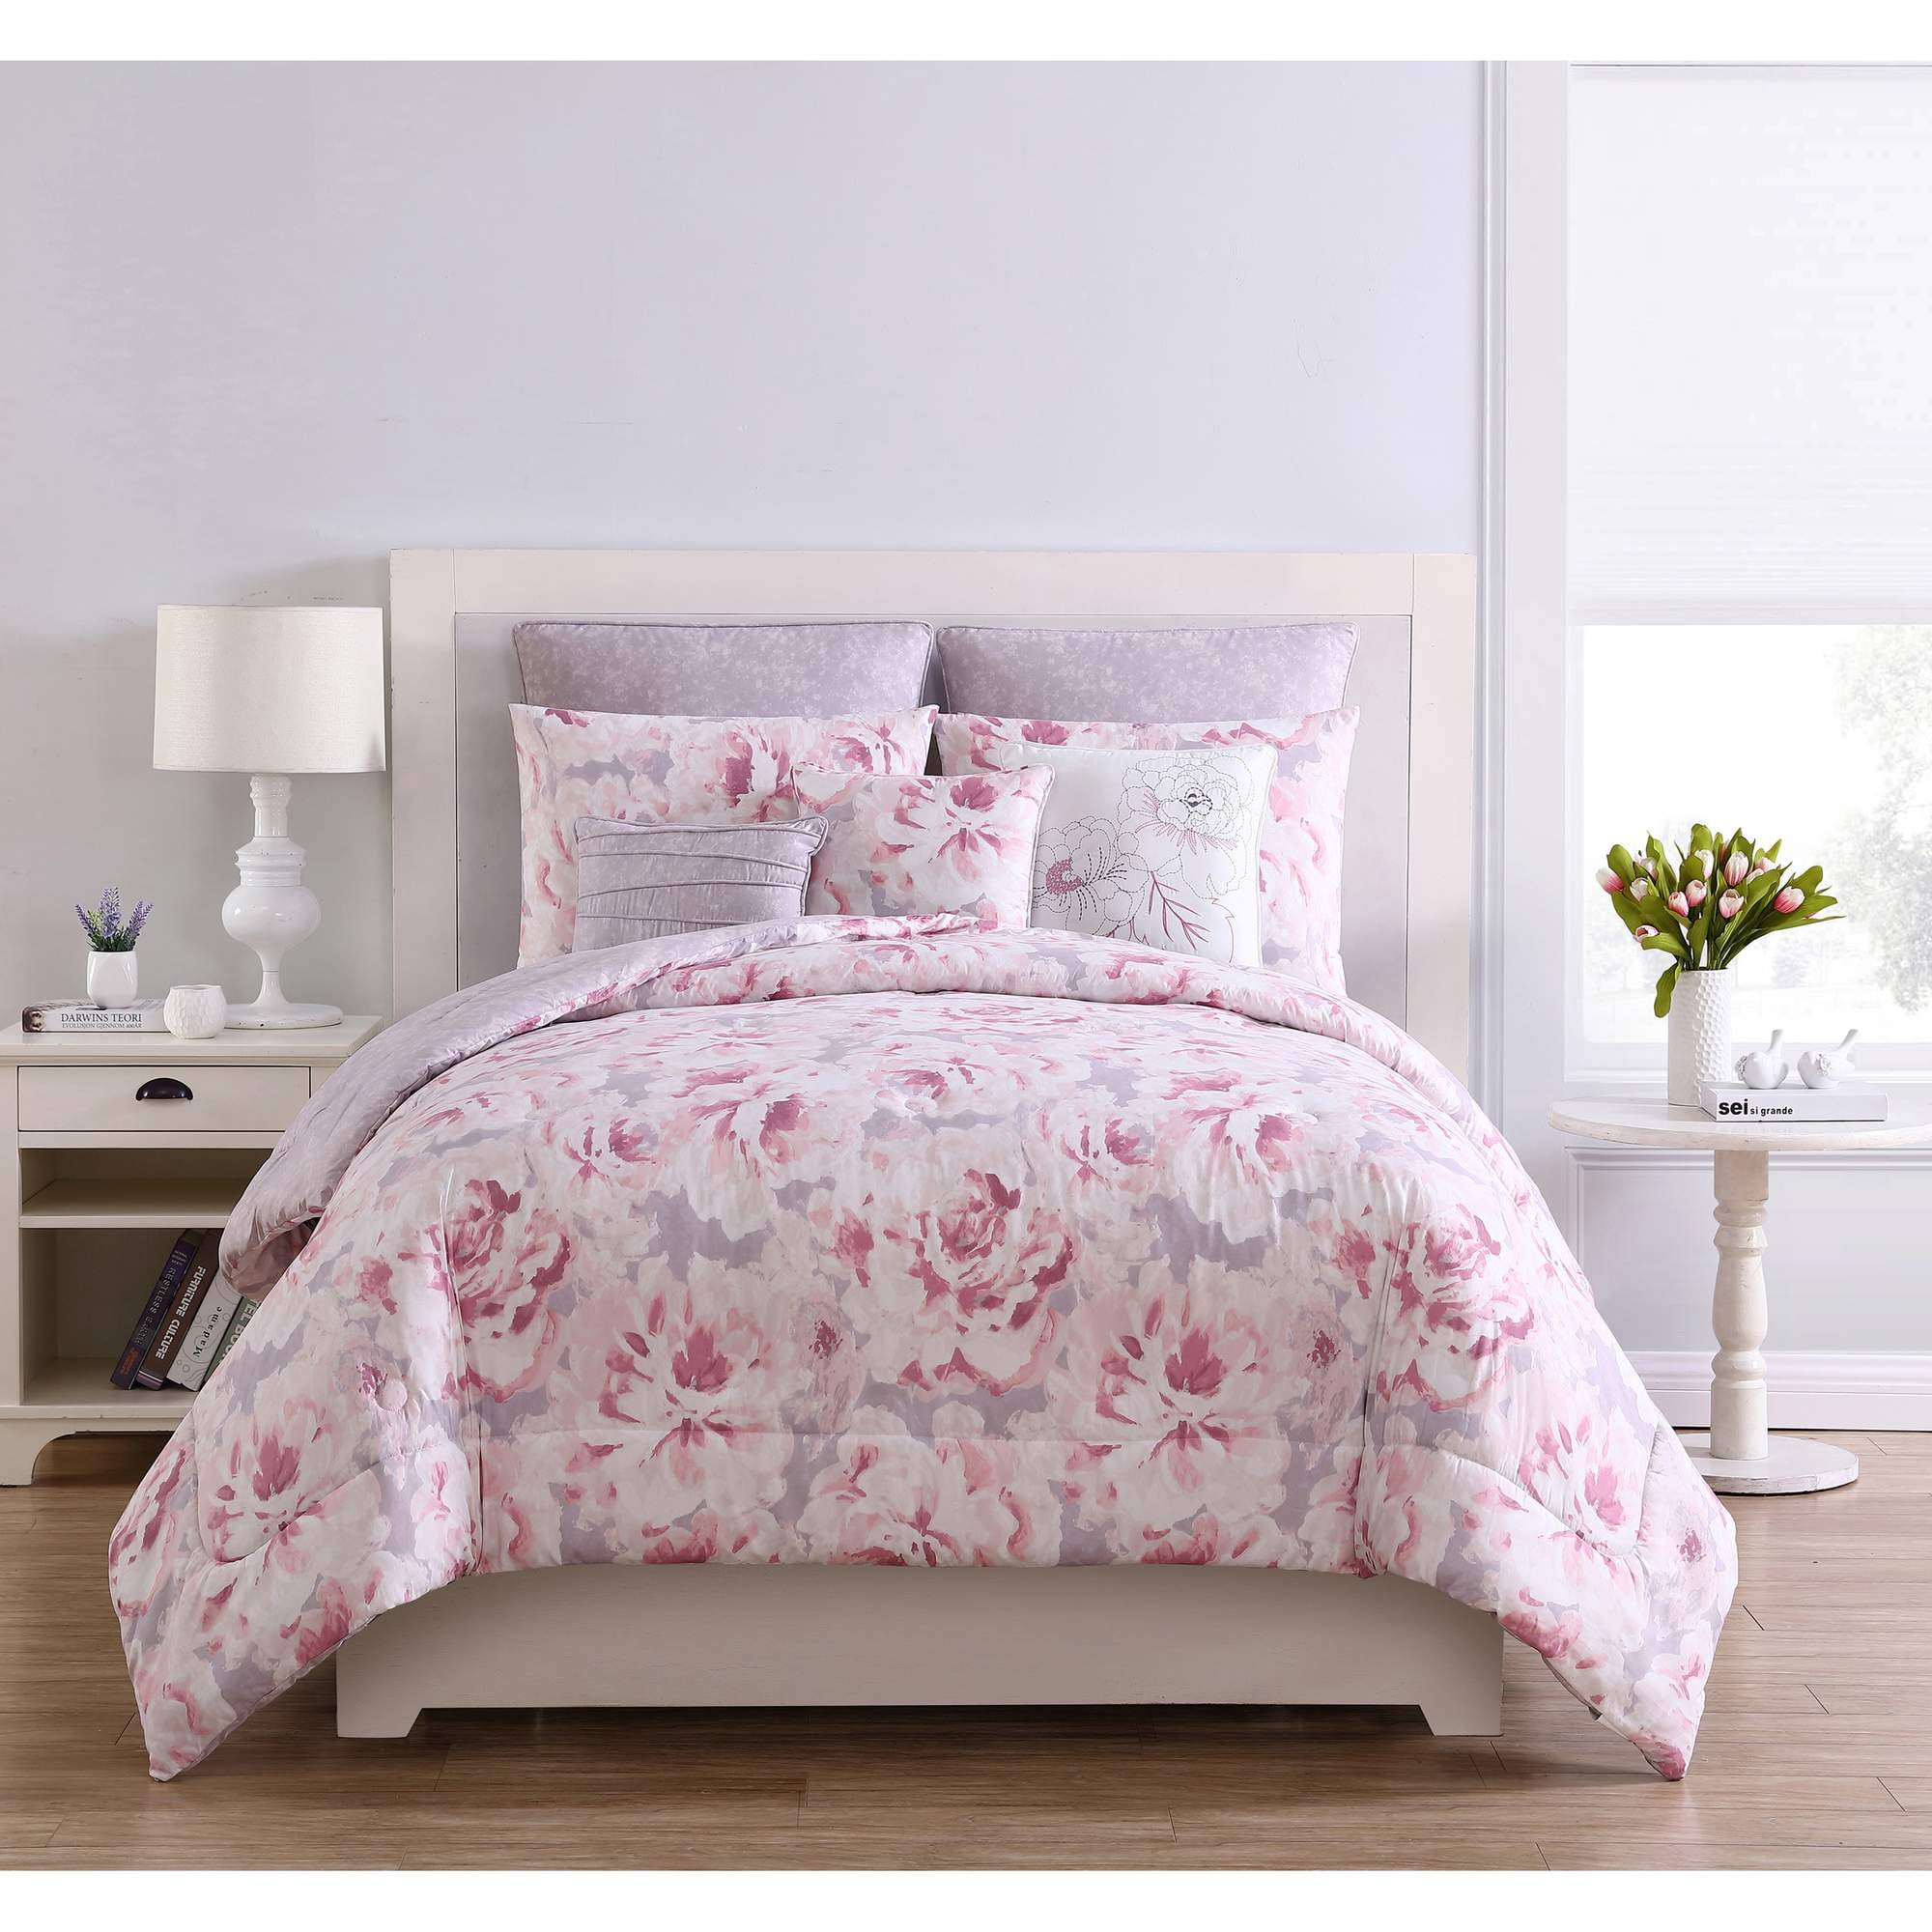 Mainstays Grey/Pink Floral Jill 8-Piece Bedding Comforter Set with Euro ...